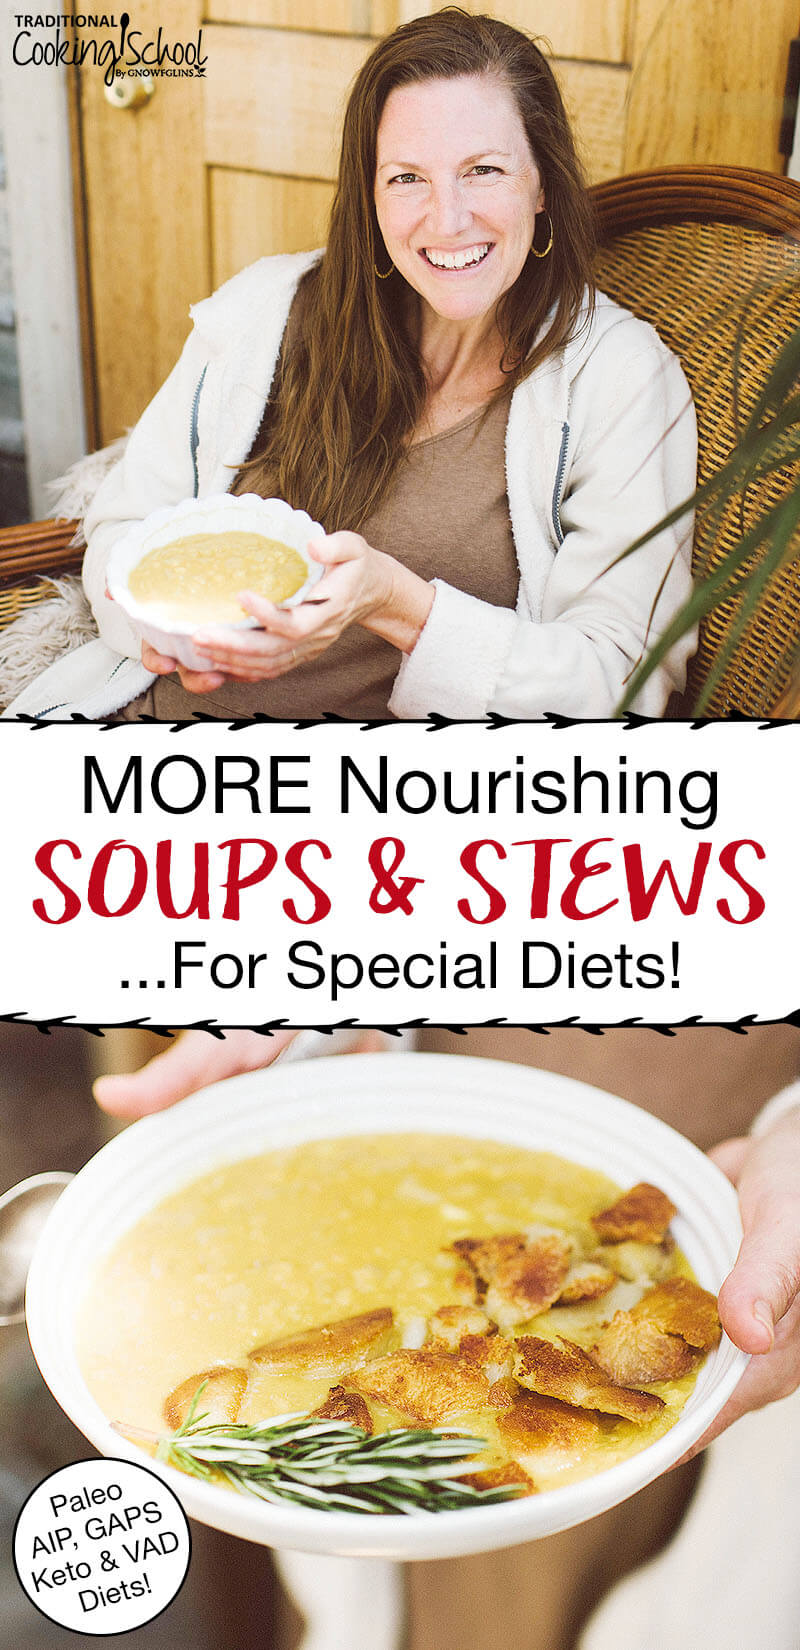 photo collage of smiling brunette woman holding a bowl of soup, with text overlay: "MORE Nourishing Soups & Stews ...For Special Diets! (Paleo, AIP, GAPS, Keto & VAD Diets)"